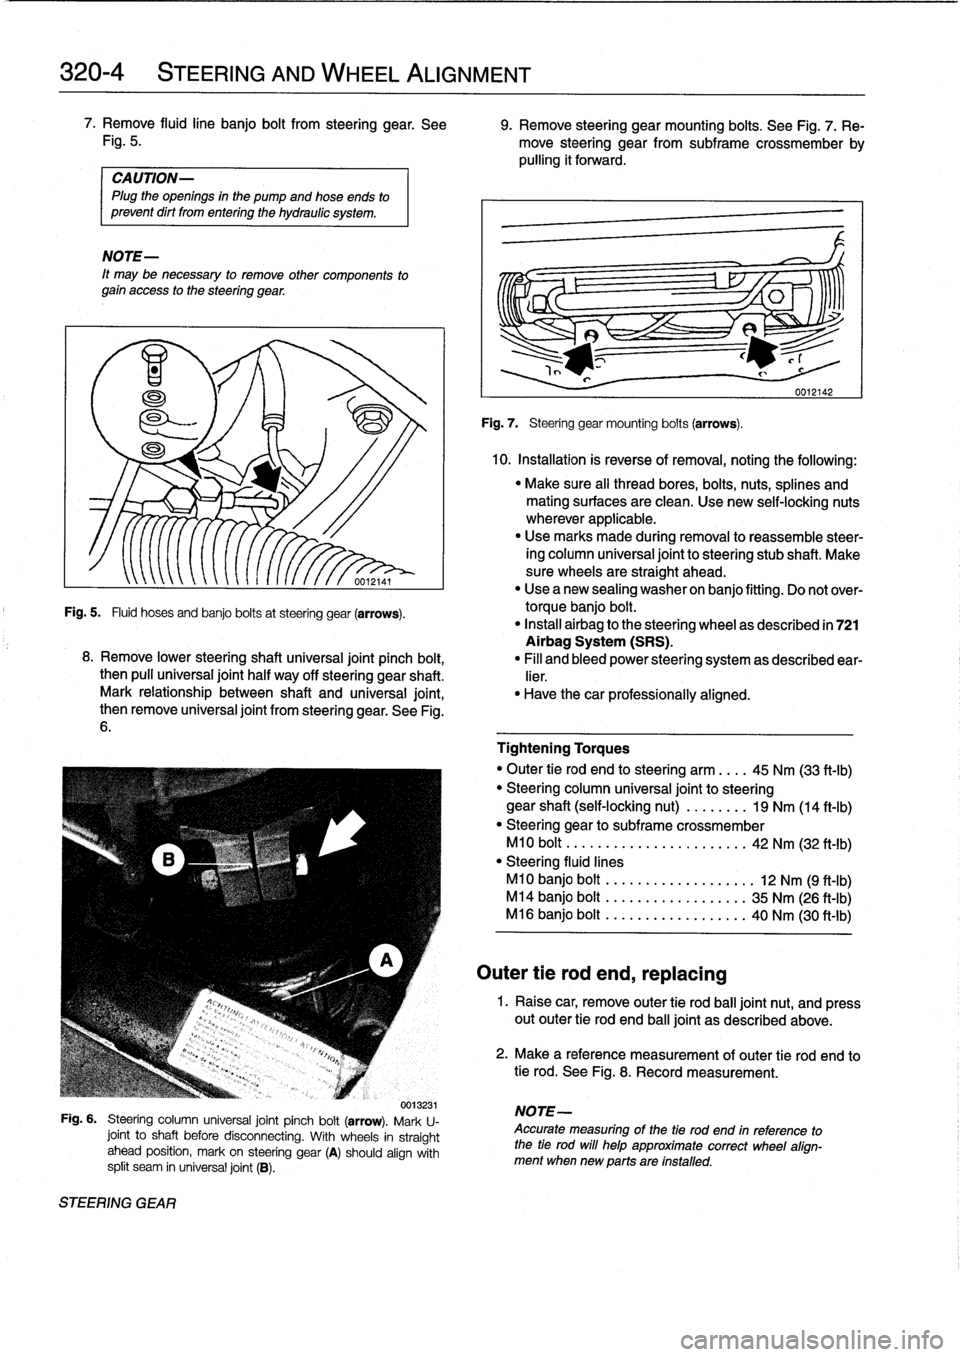 BMW 323i 1993 E36 User Guide 
320-
4

	

STEERING
AND
WHEEL
ALIGNMENT

7
.
Remove
fluidline
banjo
bolt
from
steering
gear
.
See

	

9
.
Remove
steering
gearmounting
bolts
.
See
Fig
.
7
.
Re
Fig
.
5
.

	

move
steering
gear
from
s